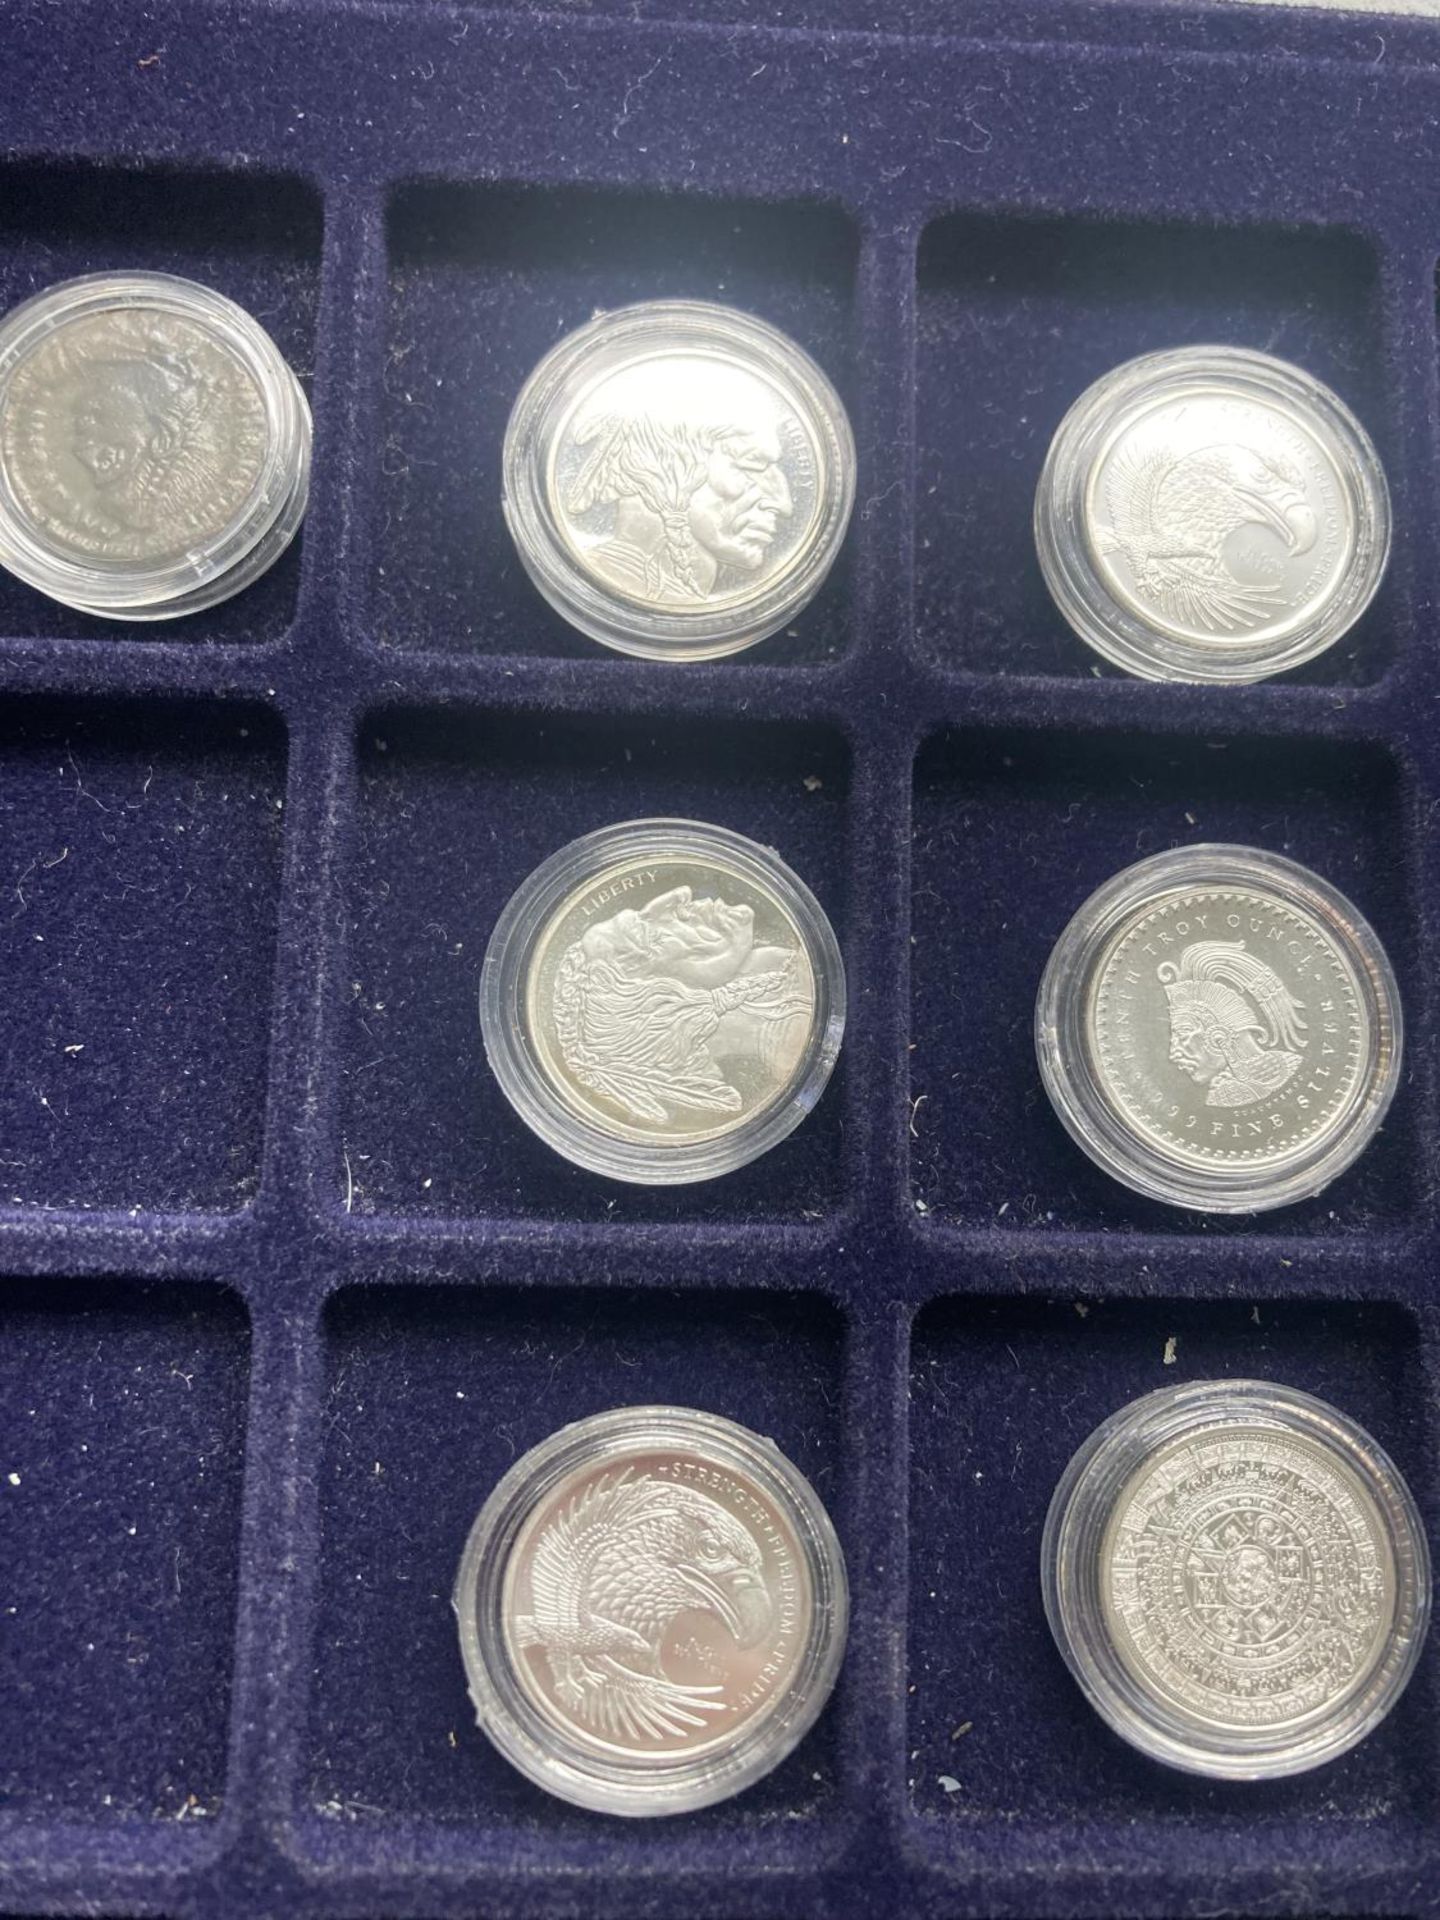 A TRAY CONTAINING EIGHTEEN 1/10 OUNCE PURE SILVER COINS - Image 2 of 4